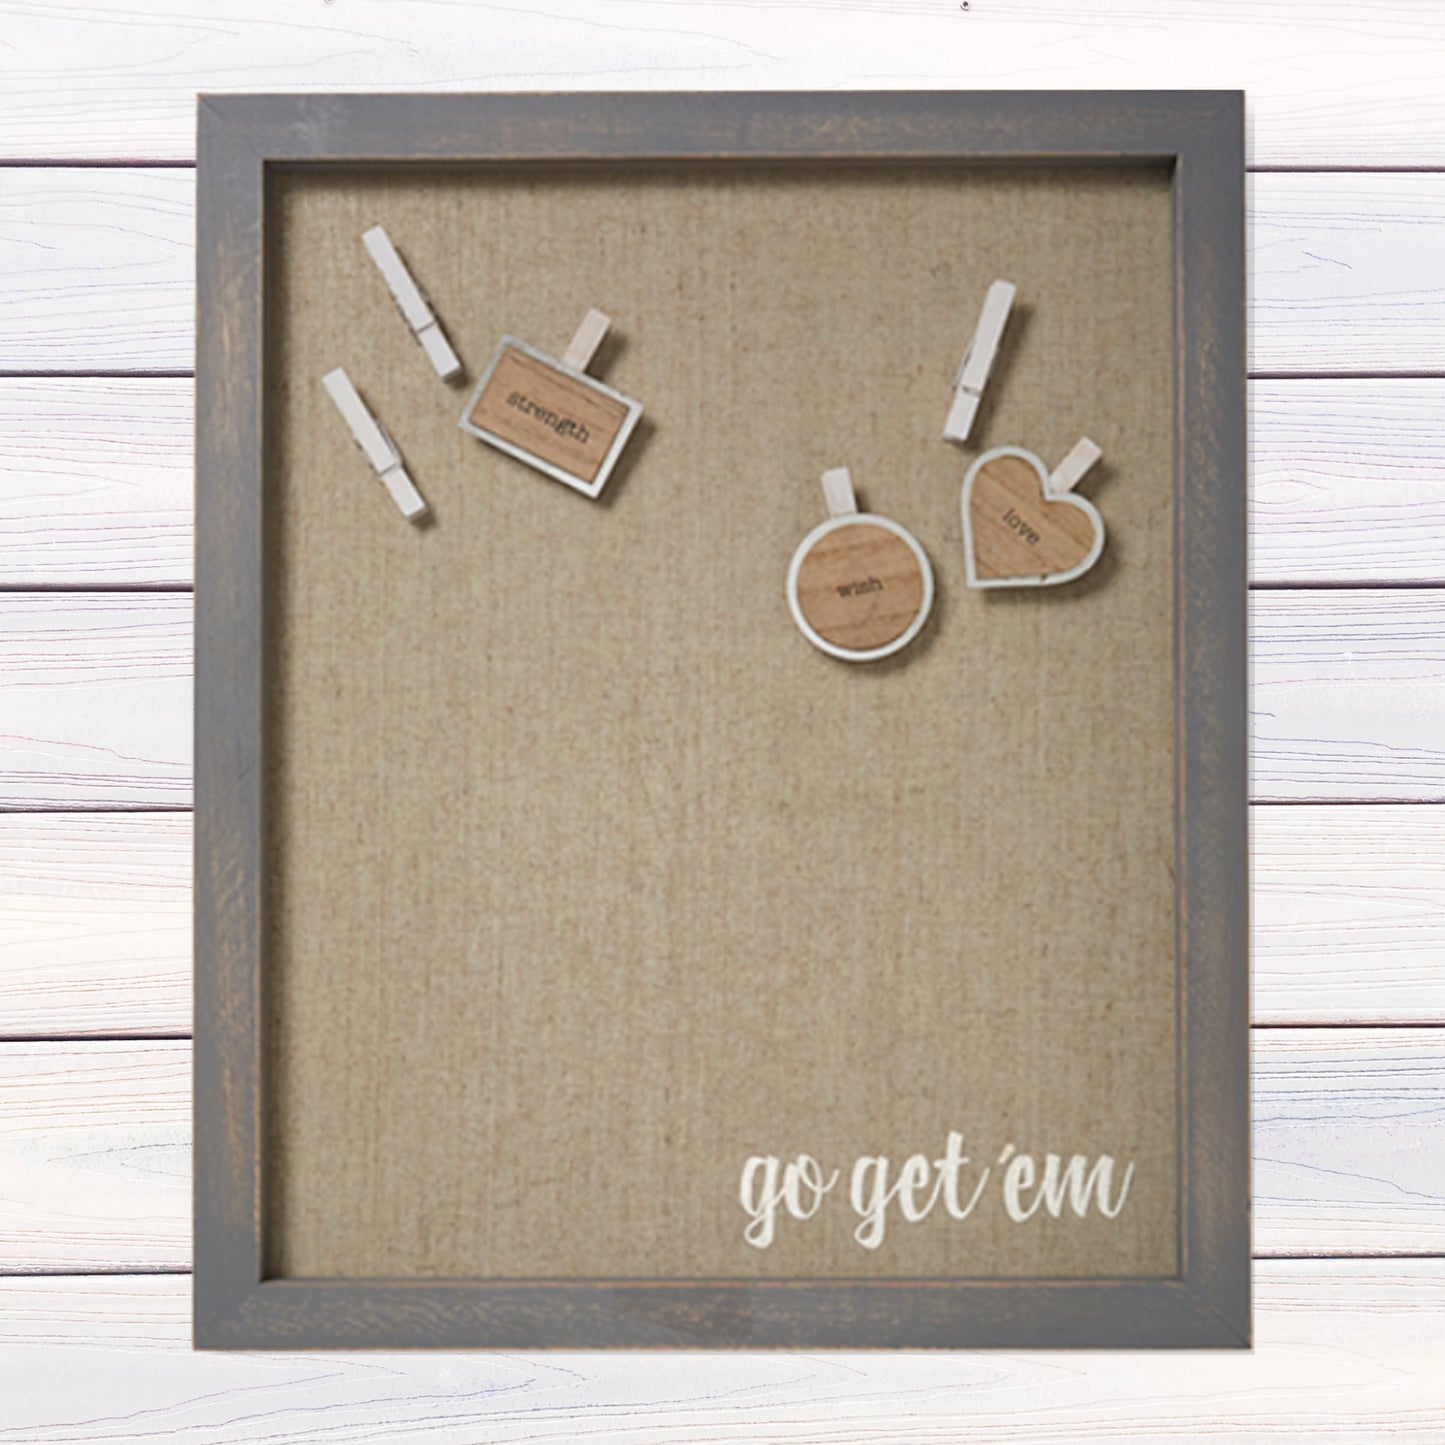 Magnet Board Fabric Framed Wall Art with Magnets - go get 'em (15x18) | Includes 6 magnets as shown... 3 clothespin magnets 3 inspirational magnets (strength, wish, love) | shown on shiplap whitewashed wall | INSIDE OUT | InsideOutCatalog.com